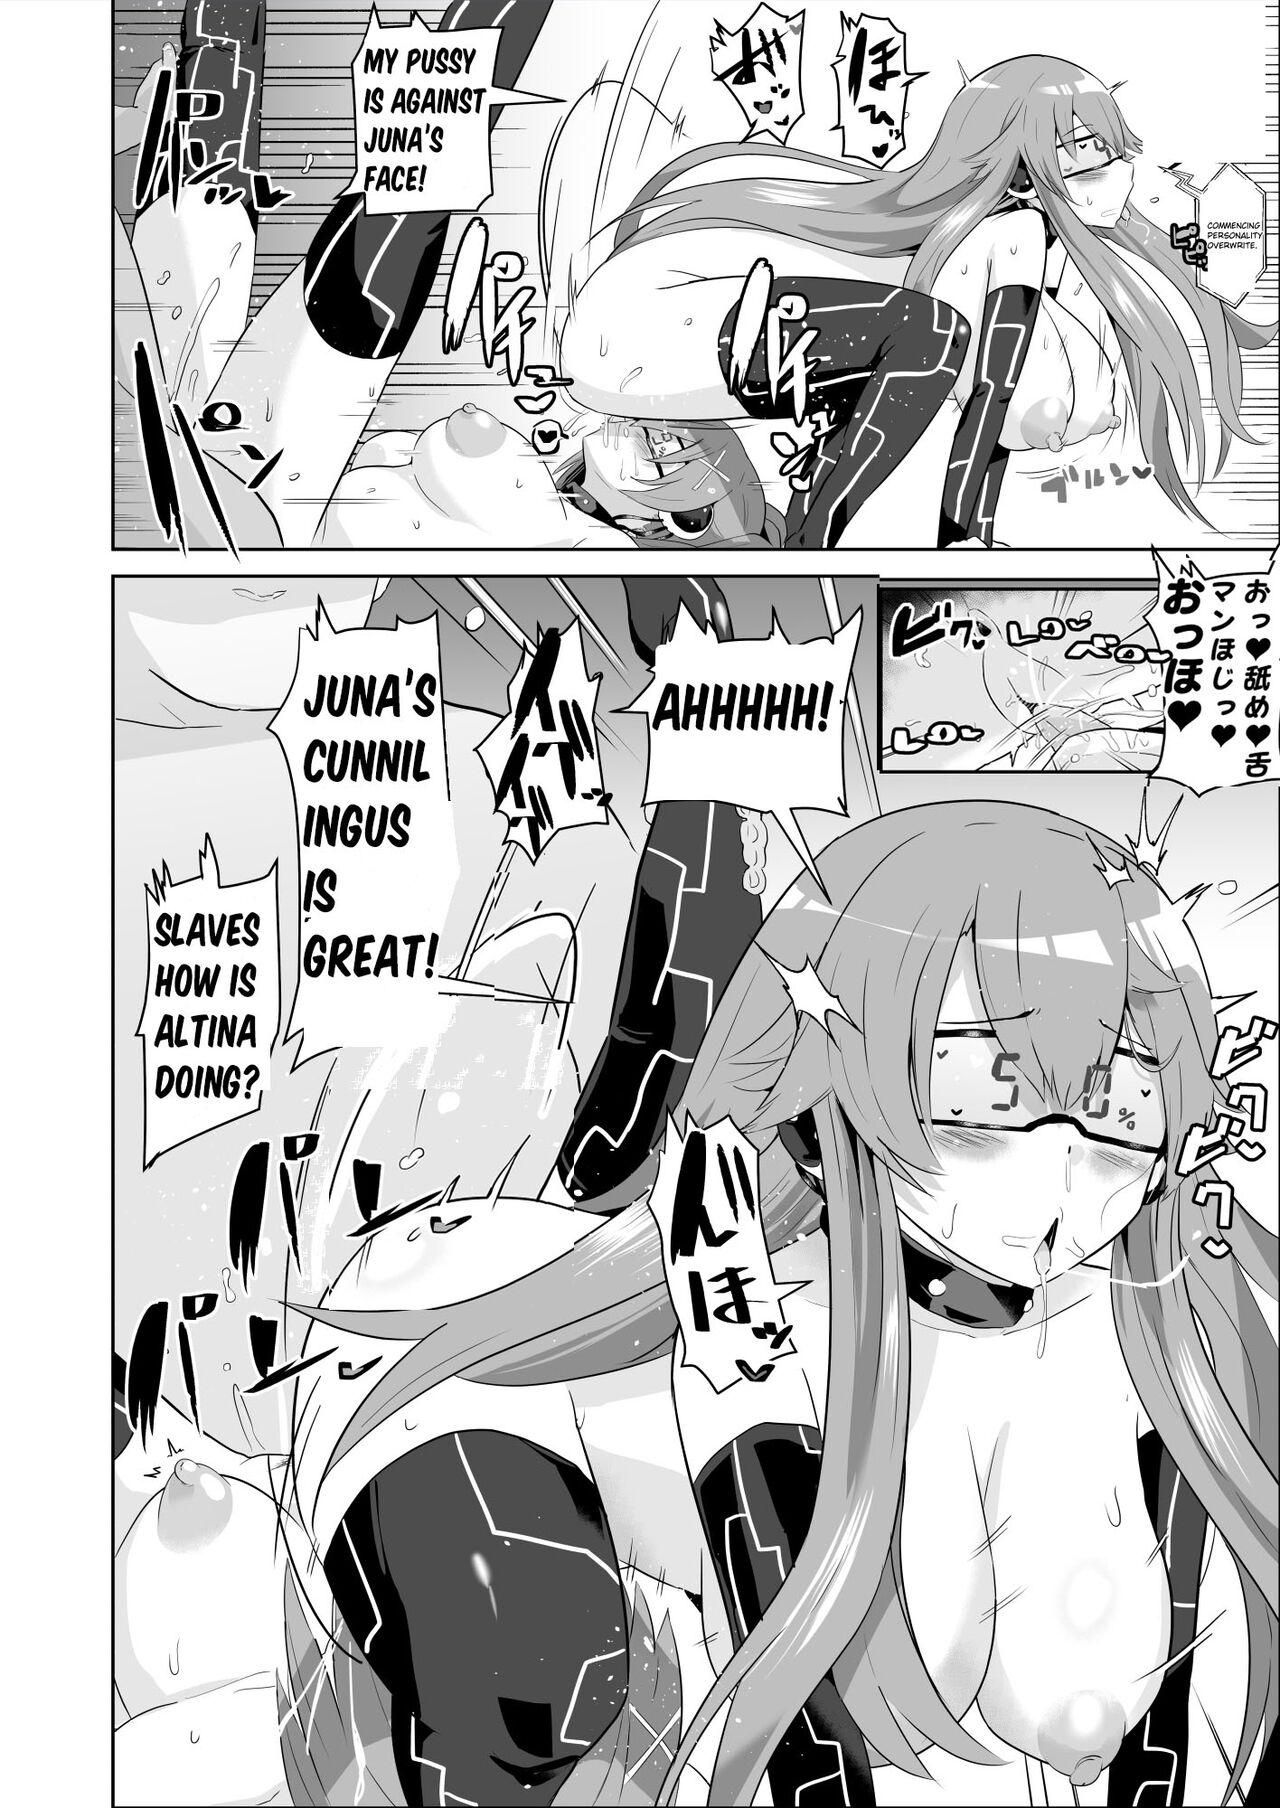 Gonzo Hypnosis of the New Class VII - Class X's Enslavement - The legend of heroes | eiyuu densetsu Straight Porn - Page 3